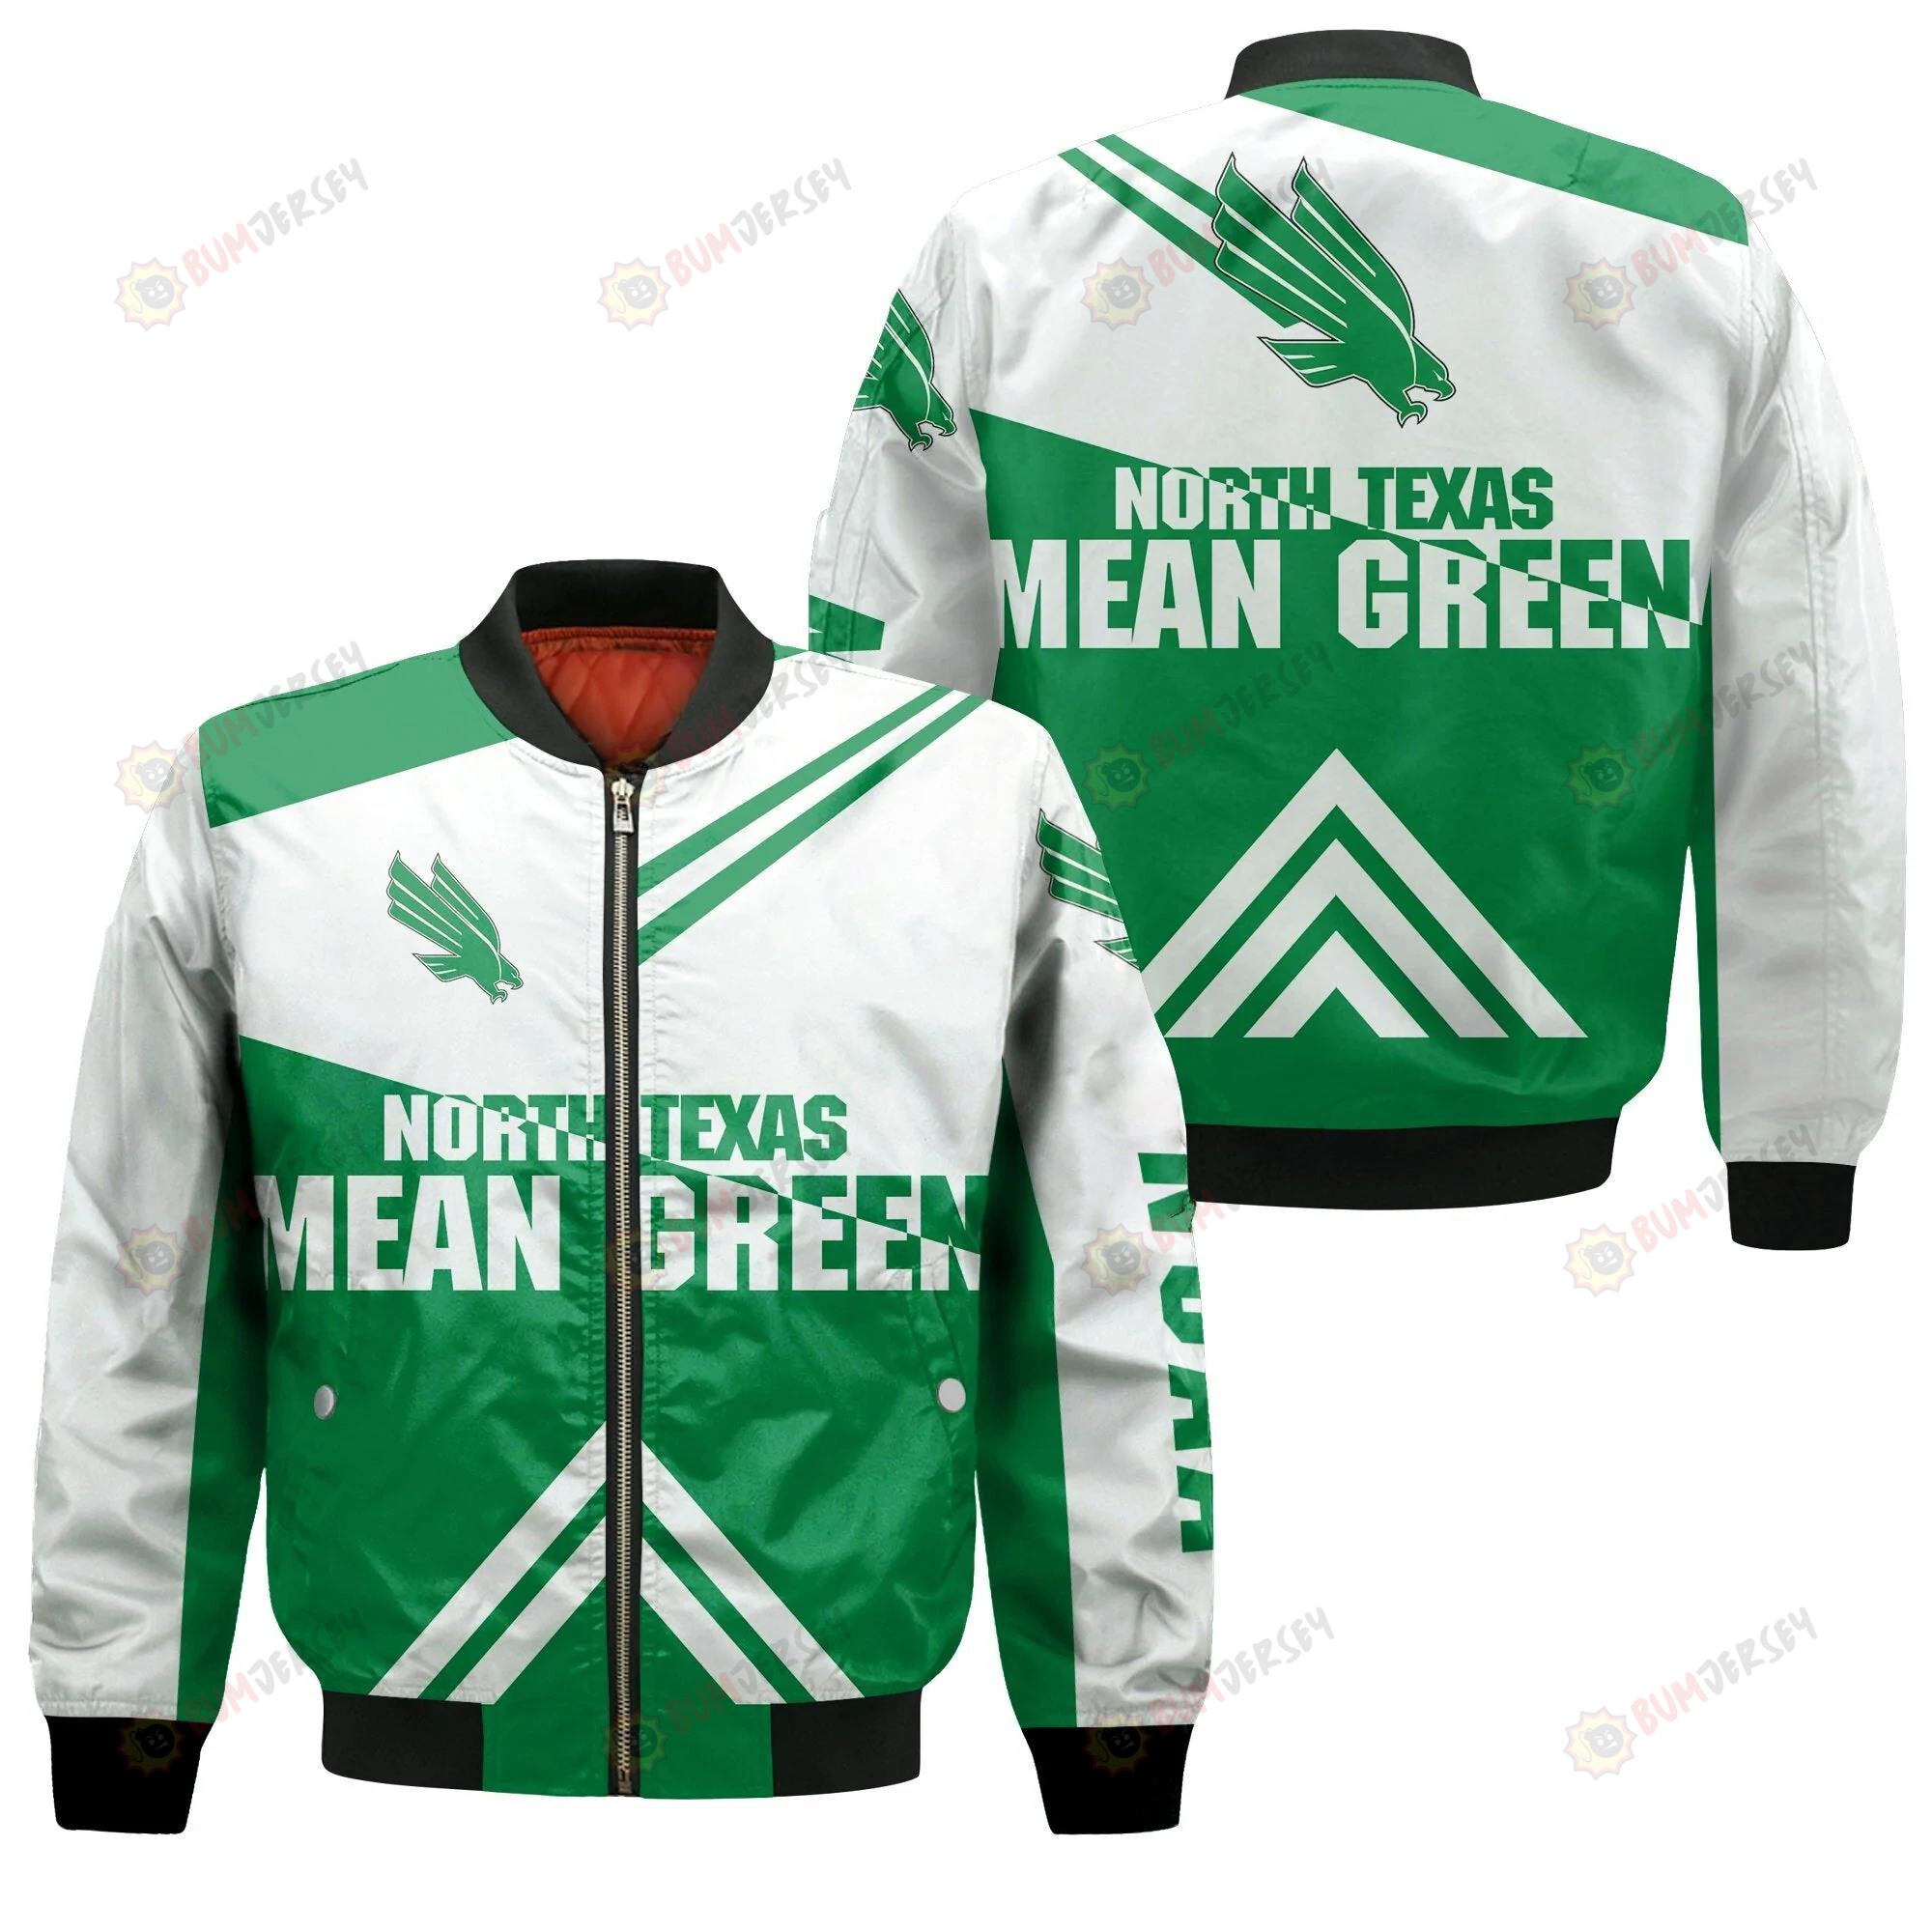 North Texas Mean Green Football Bomber Jacket 3D Printed - Stripes Cross Shoulders